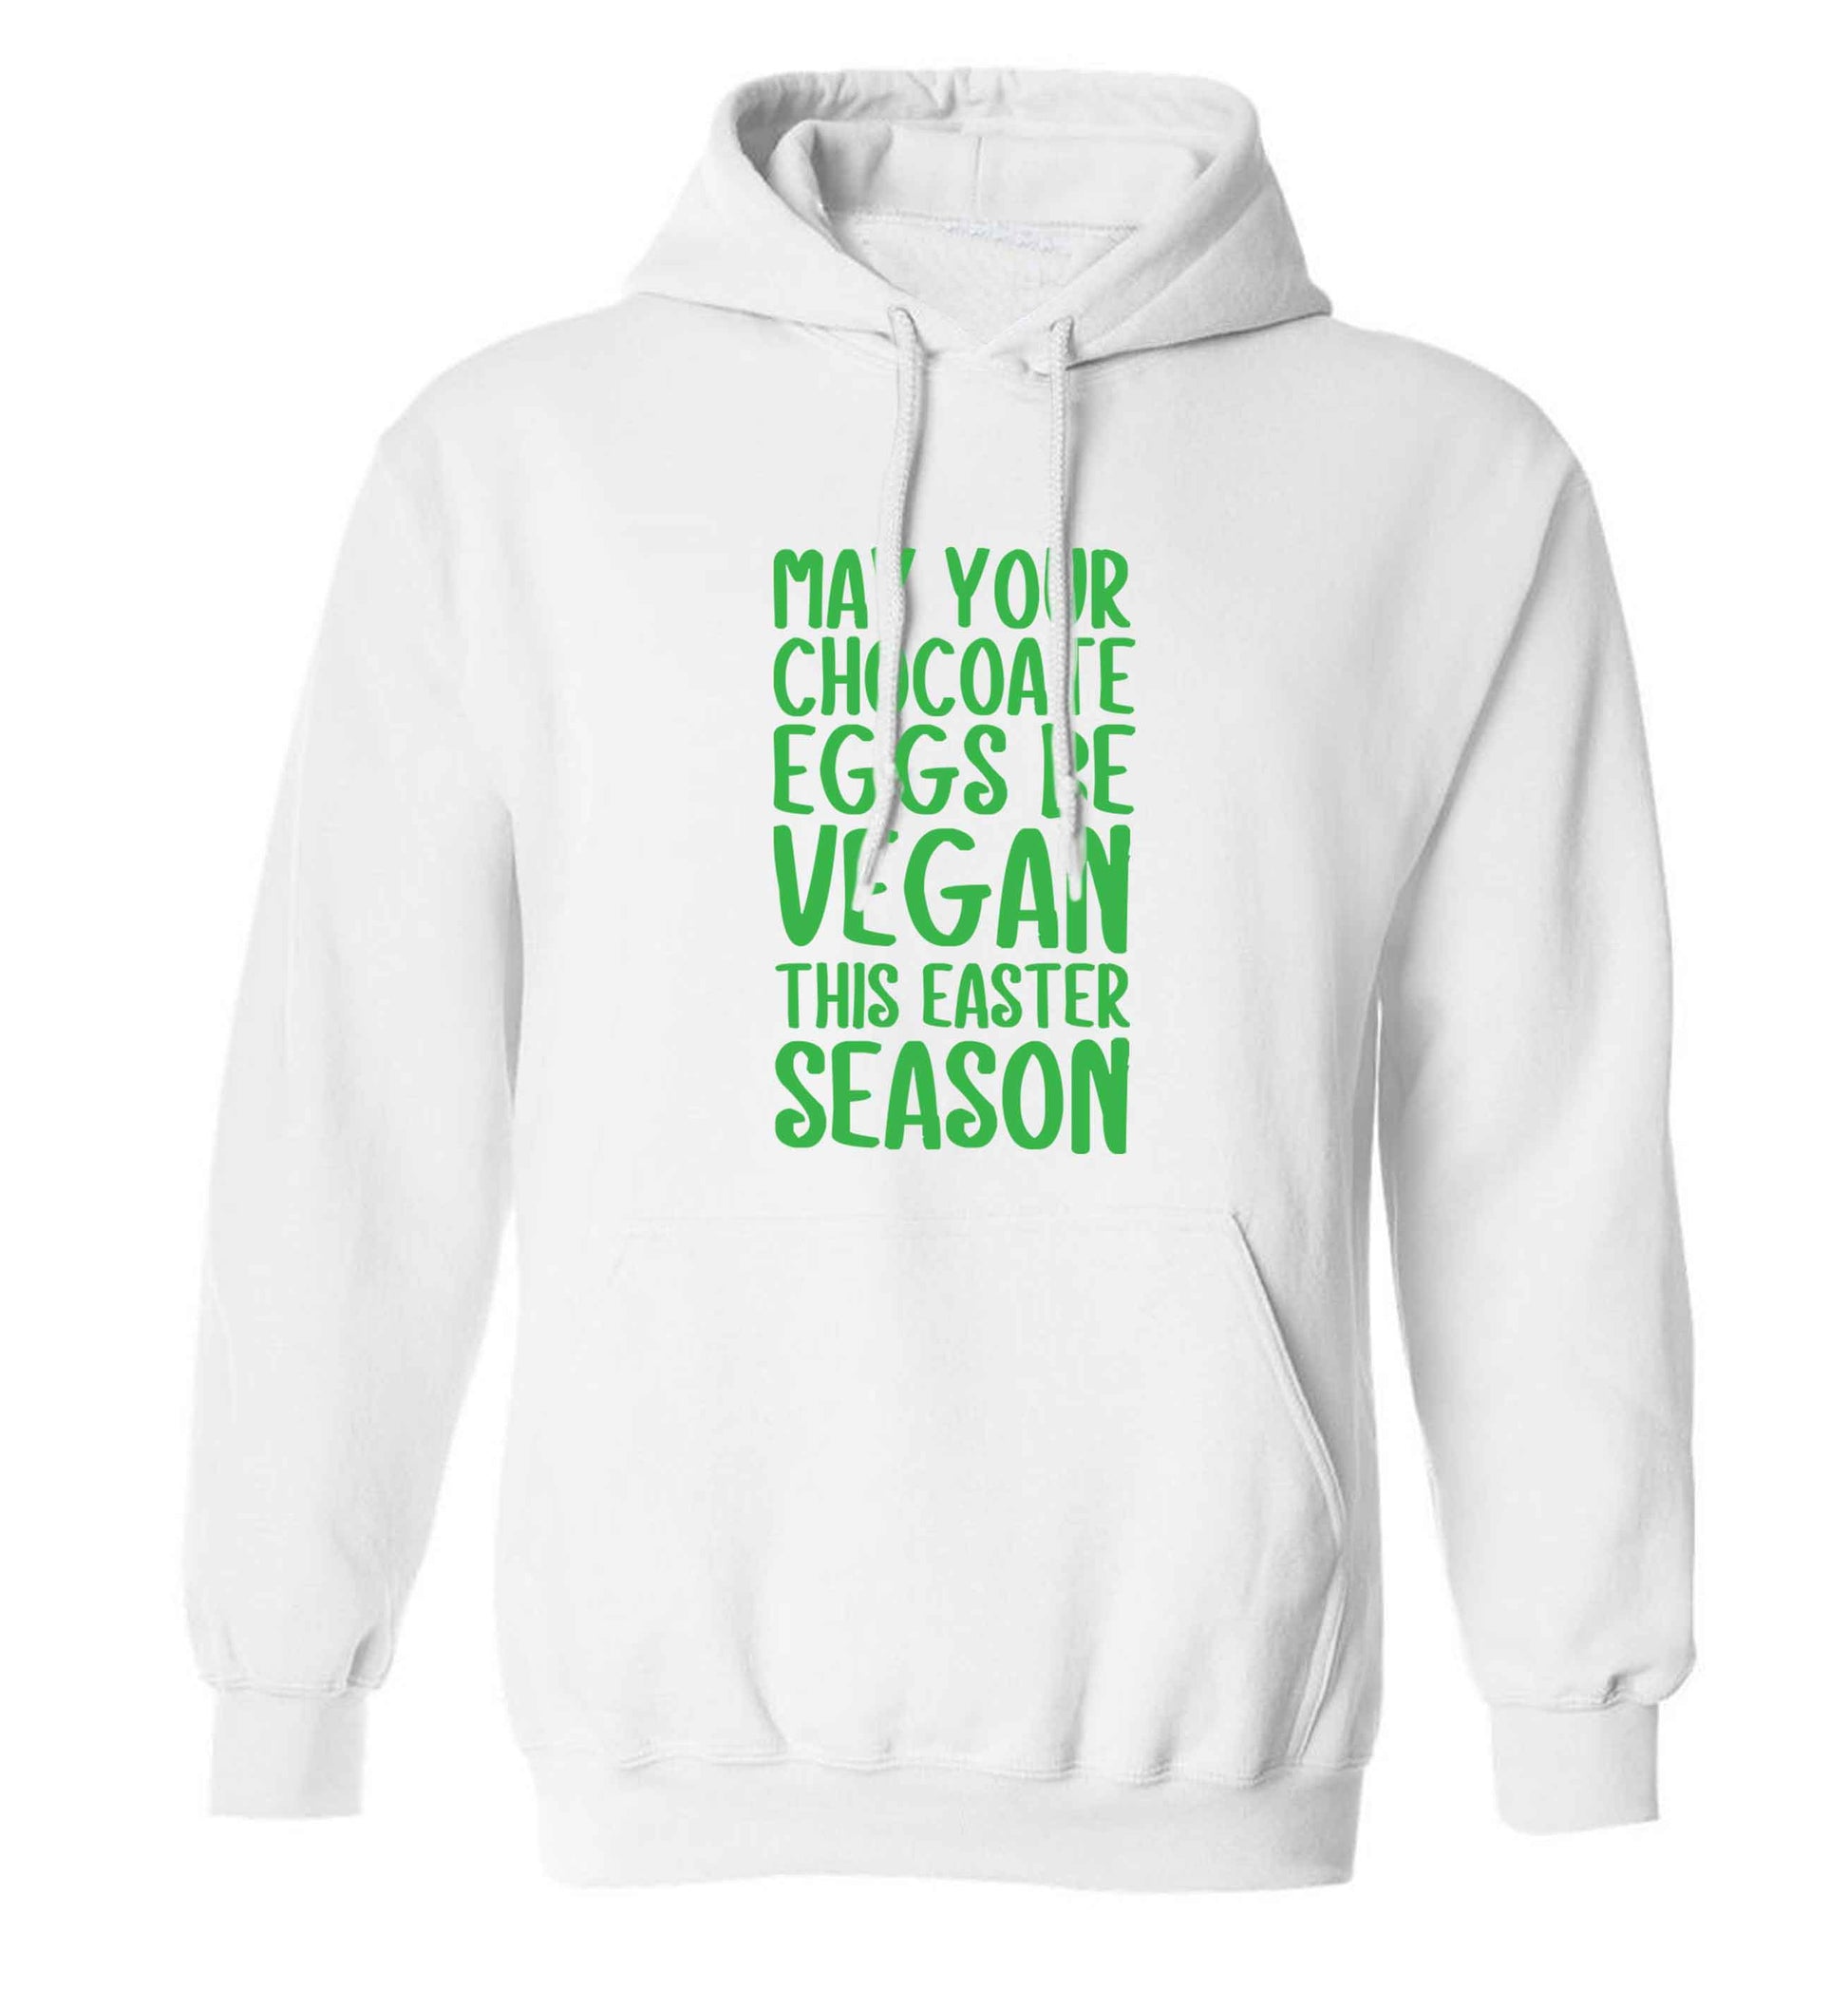 Easter bunny approved! Vegans will love this easter themed adults unisex white hoodie 2XL